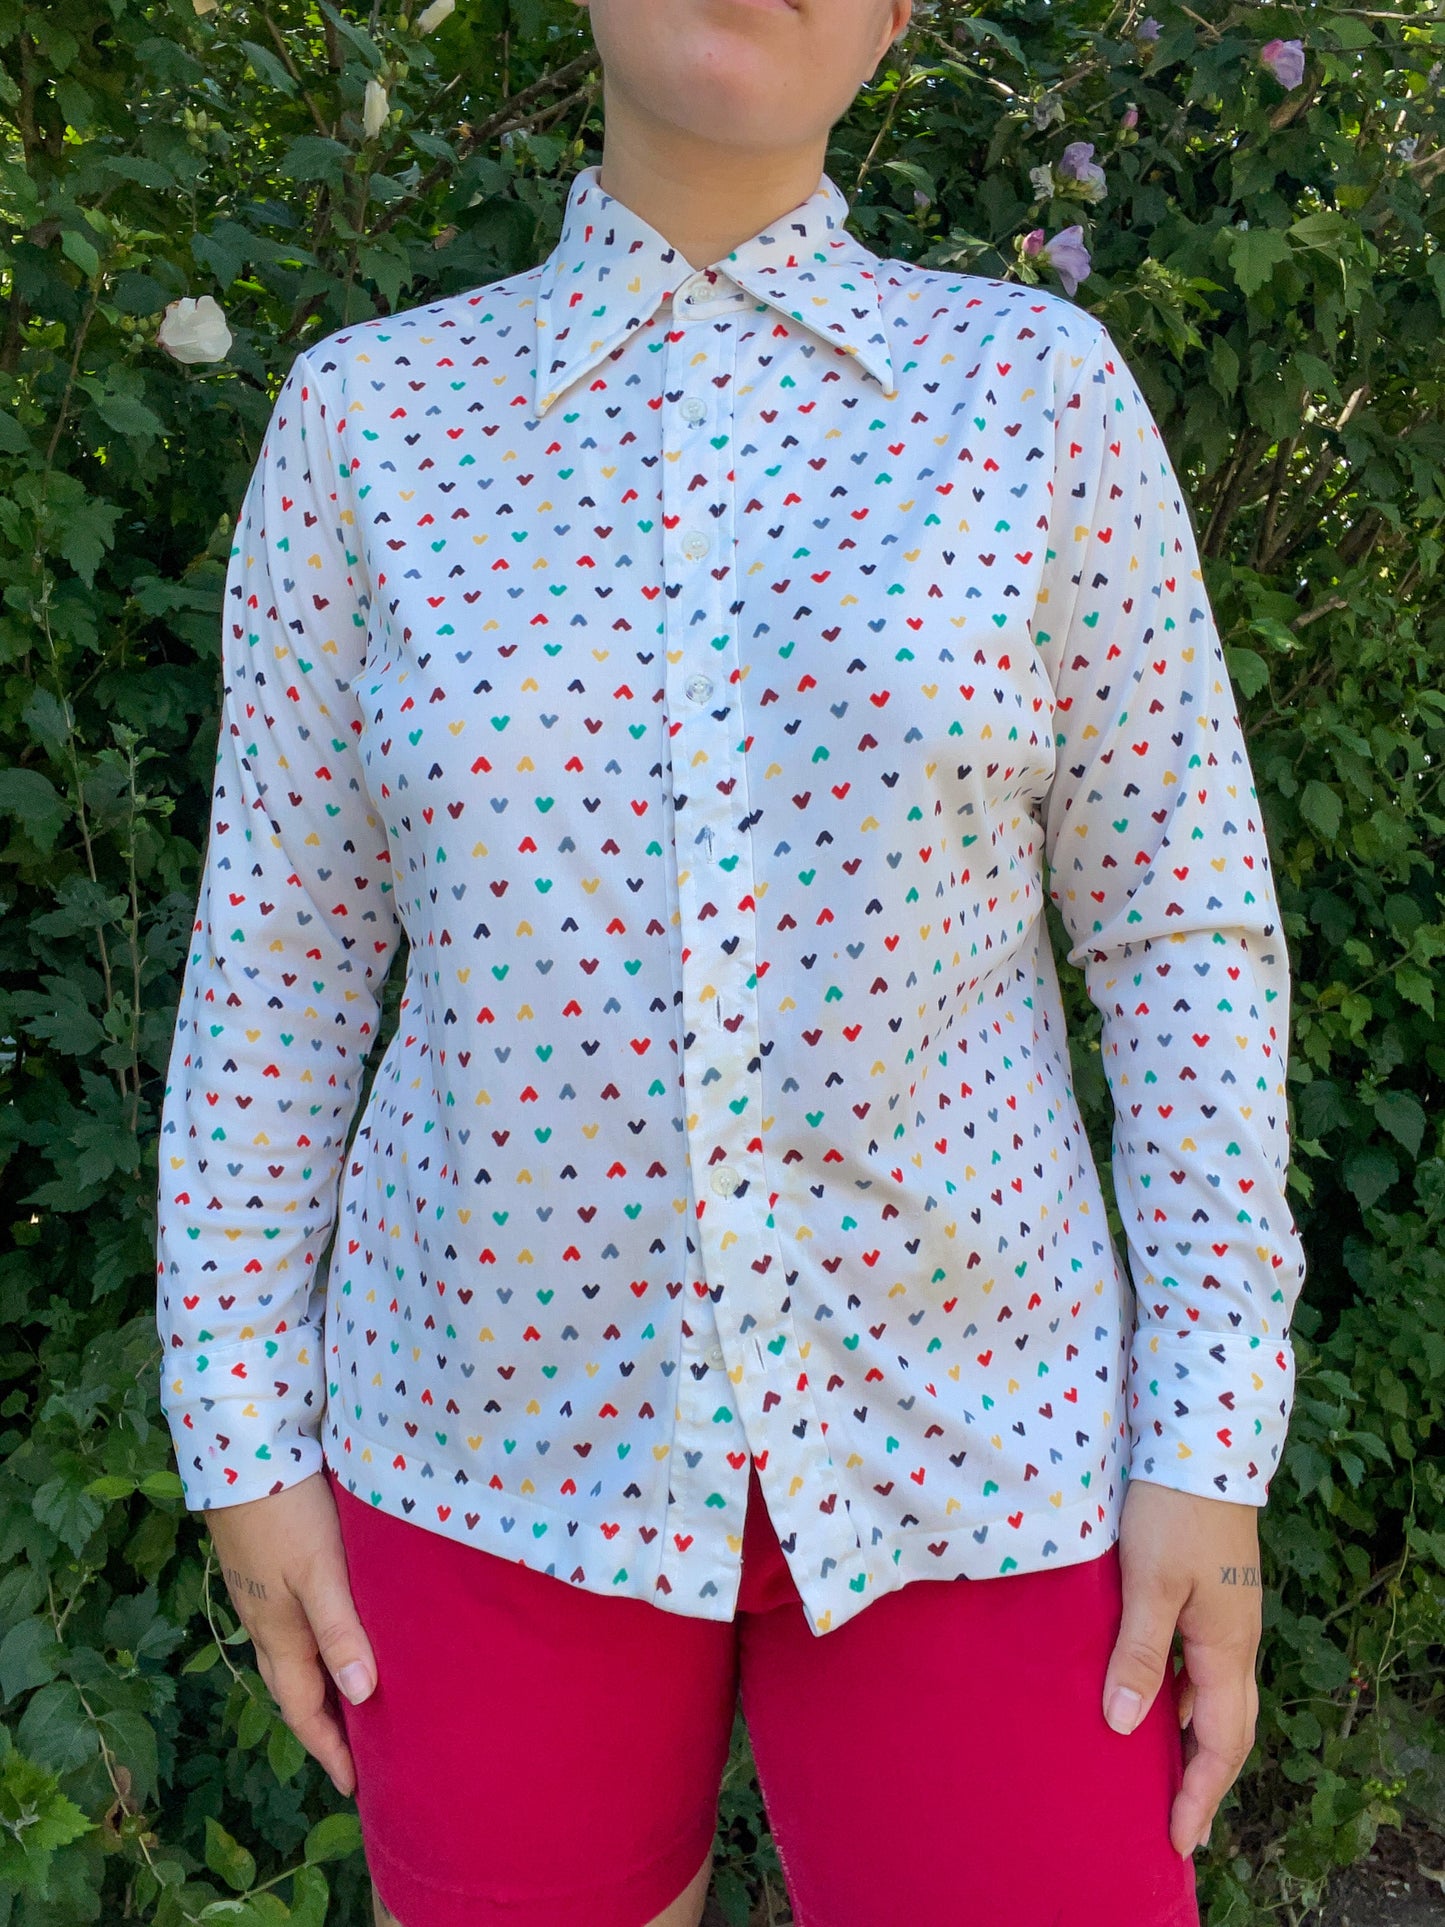 70s Rainbow Heart Print Button Up Top (L)